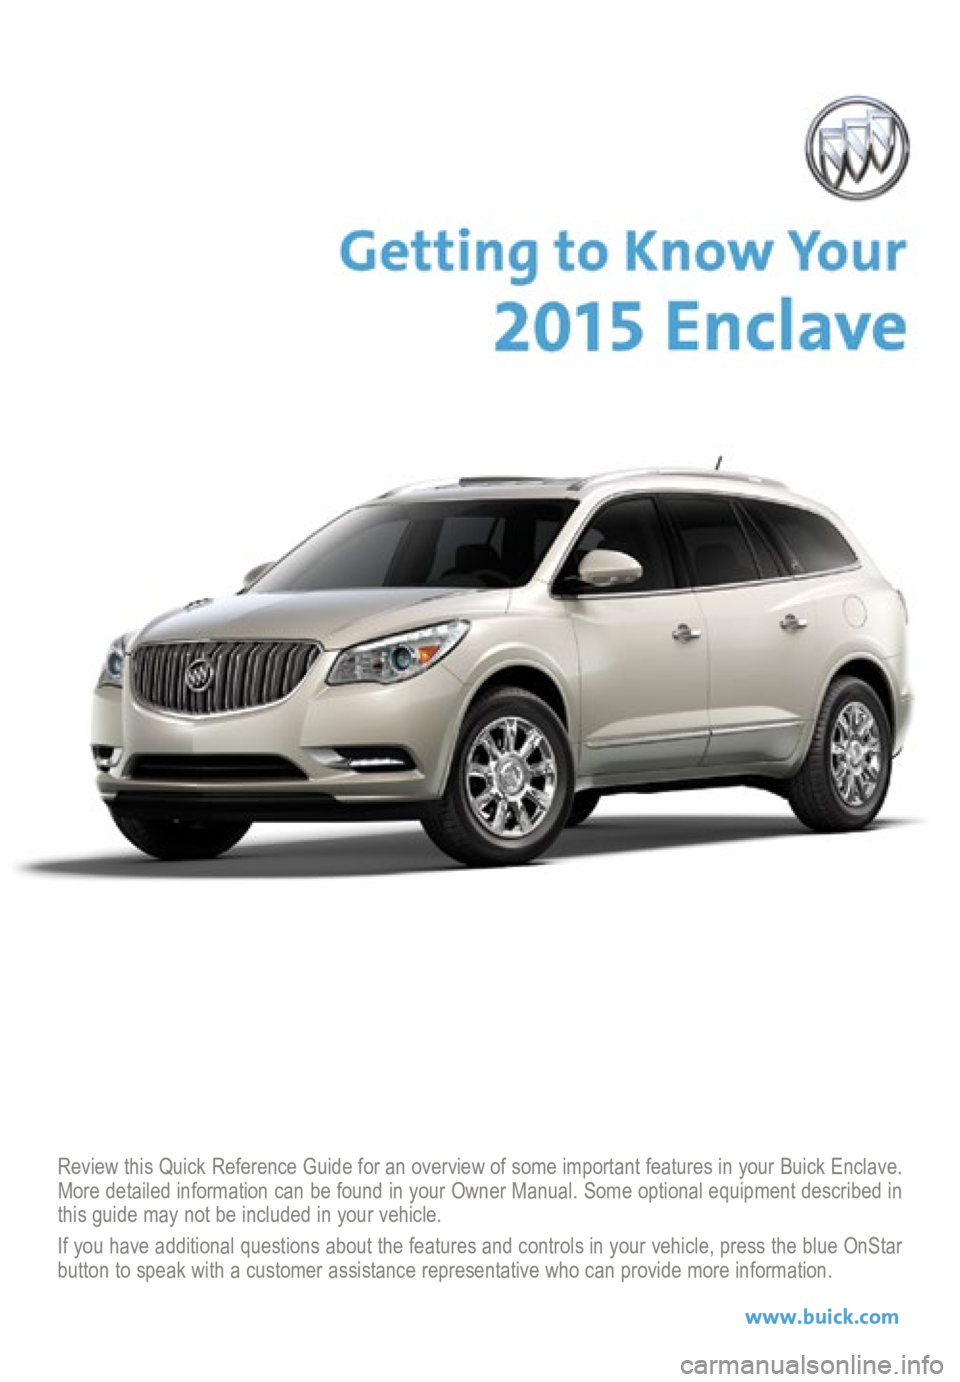 BUICK ENCLAVE 2015  Get To Know Guide Review this Quick Reference Guide for an overview of some important features in your Buick Enclave. 
More detailed information can be found in your Owner Manual. Some option\
al equipment described in